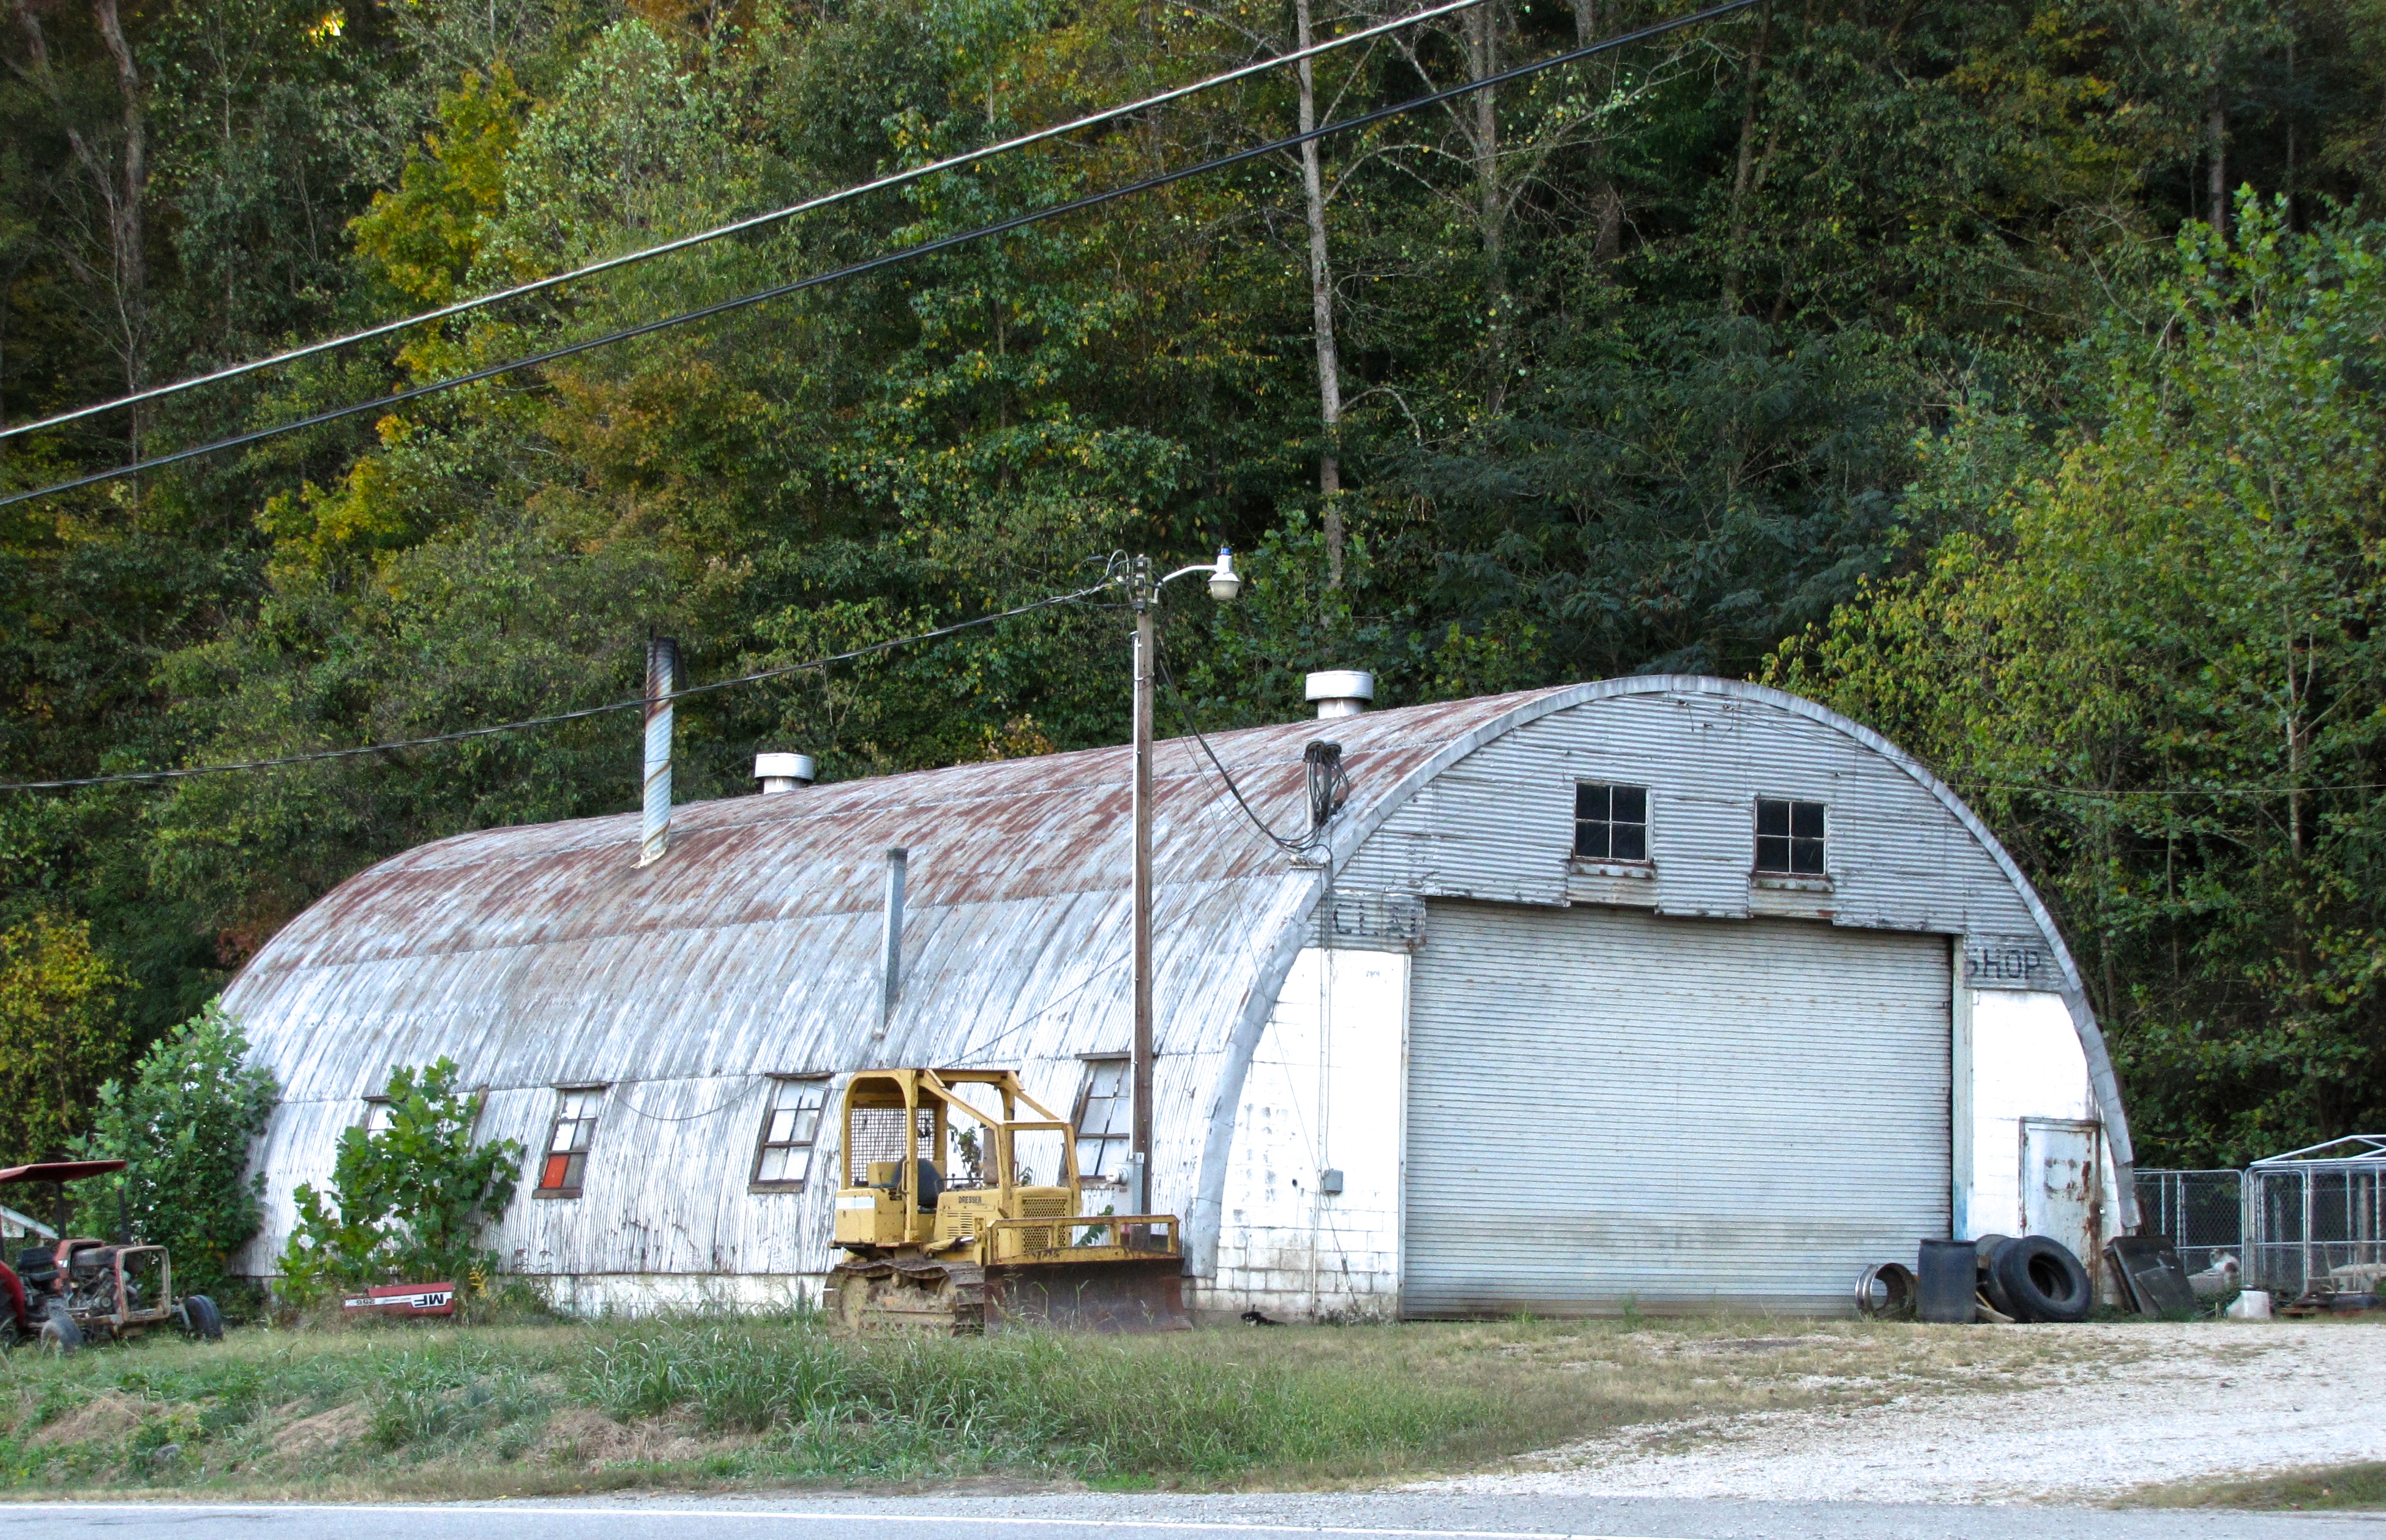 quonset hut in About Us, MI